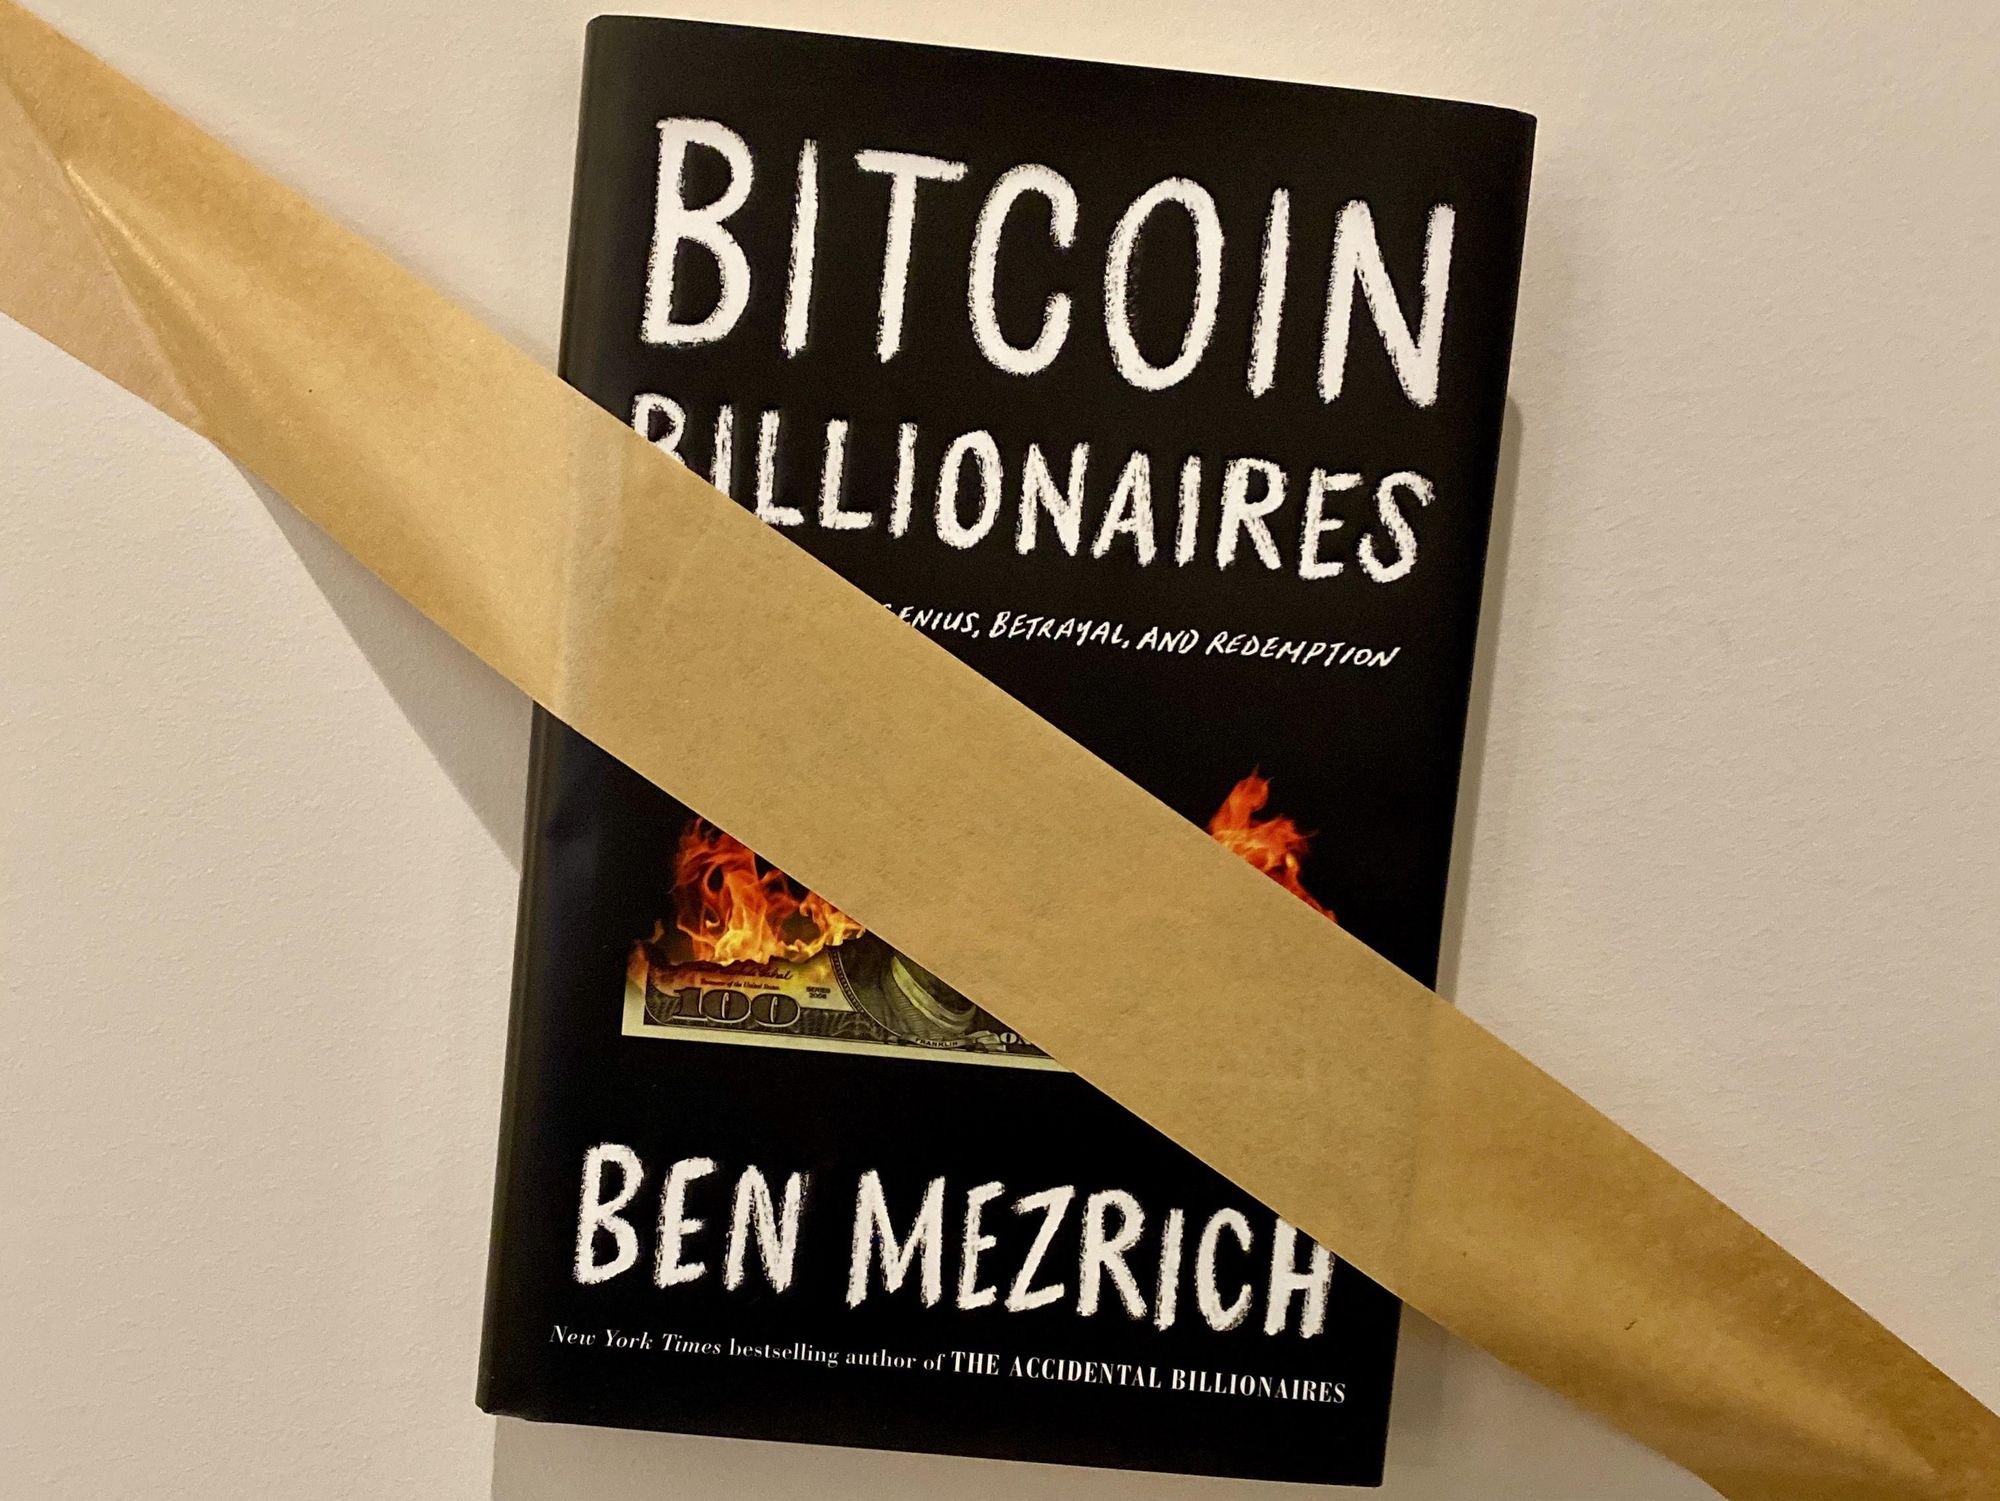 Ben Mezrich's book Bitcoin Billionaires taped to the wall 